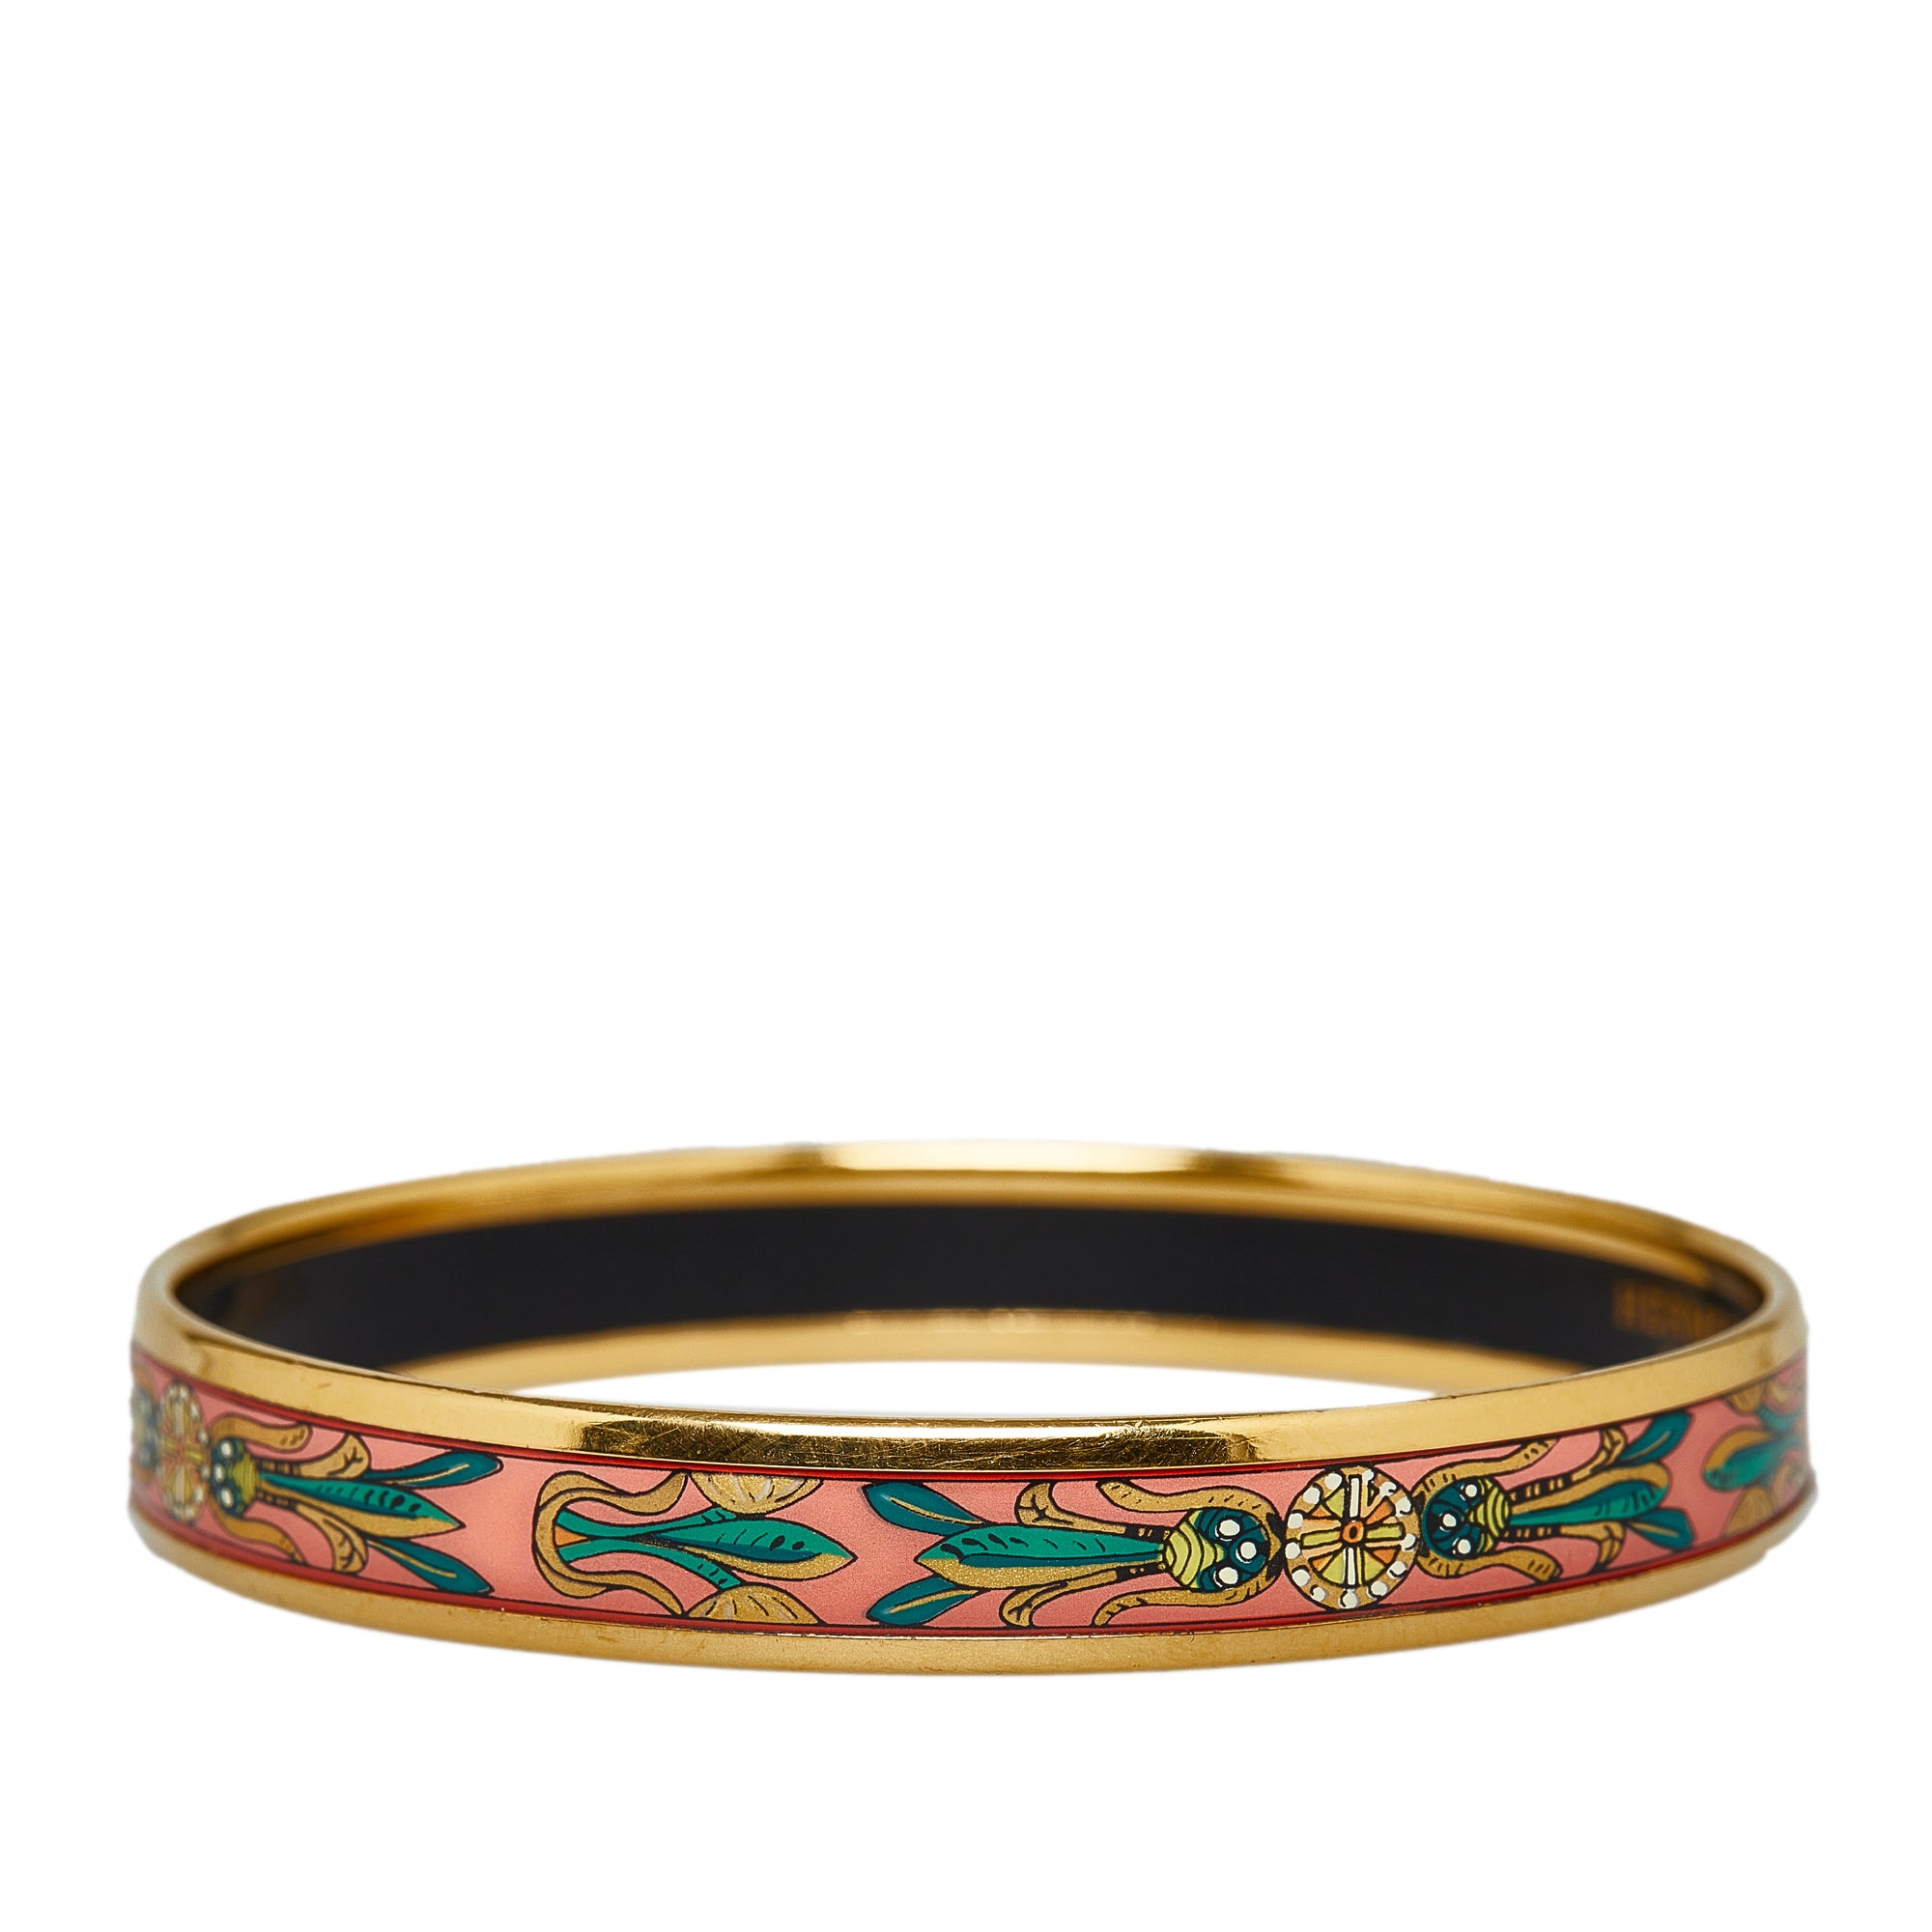 Hermes Paris Enameled Abstract Number Bangle